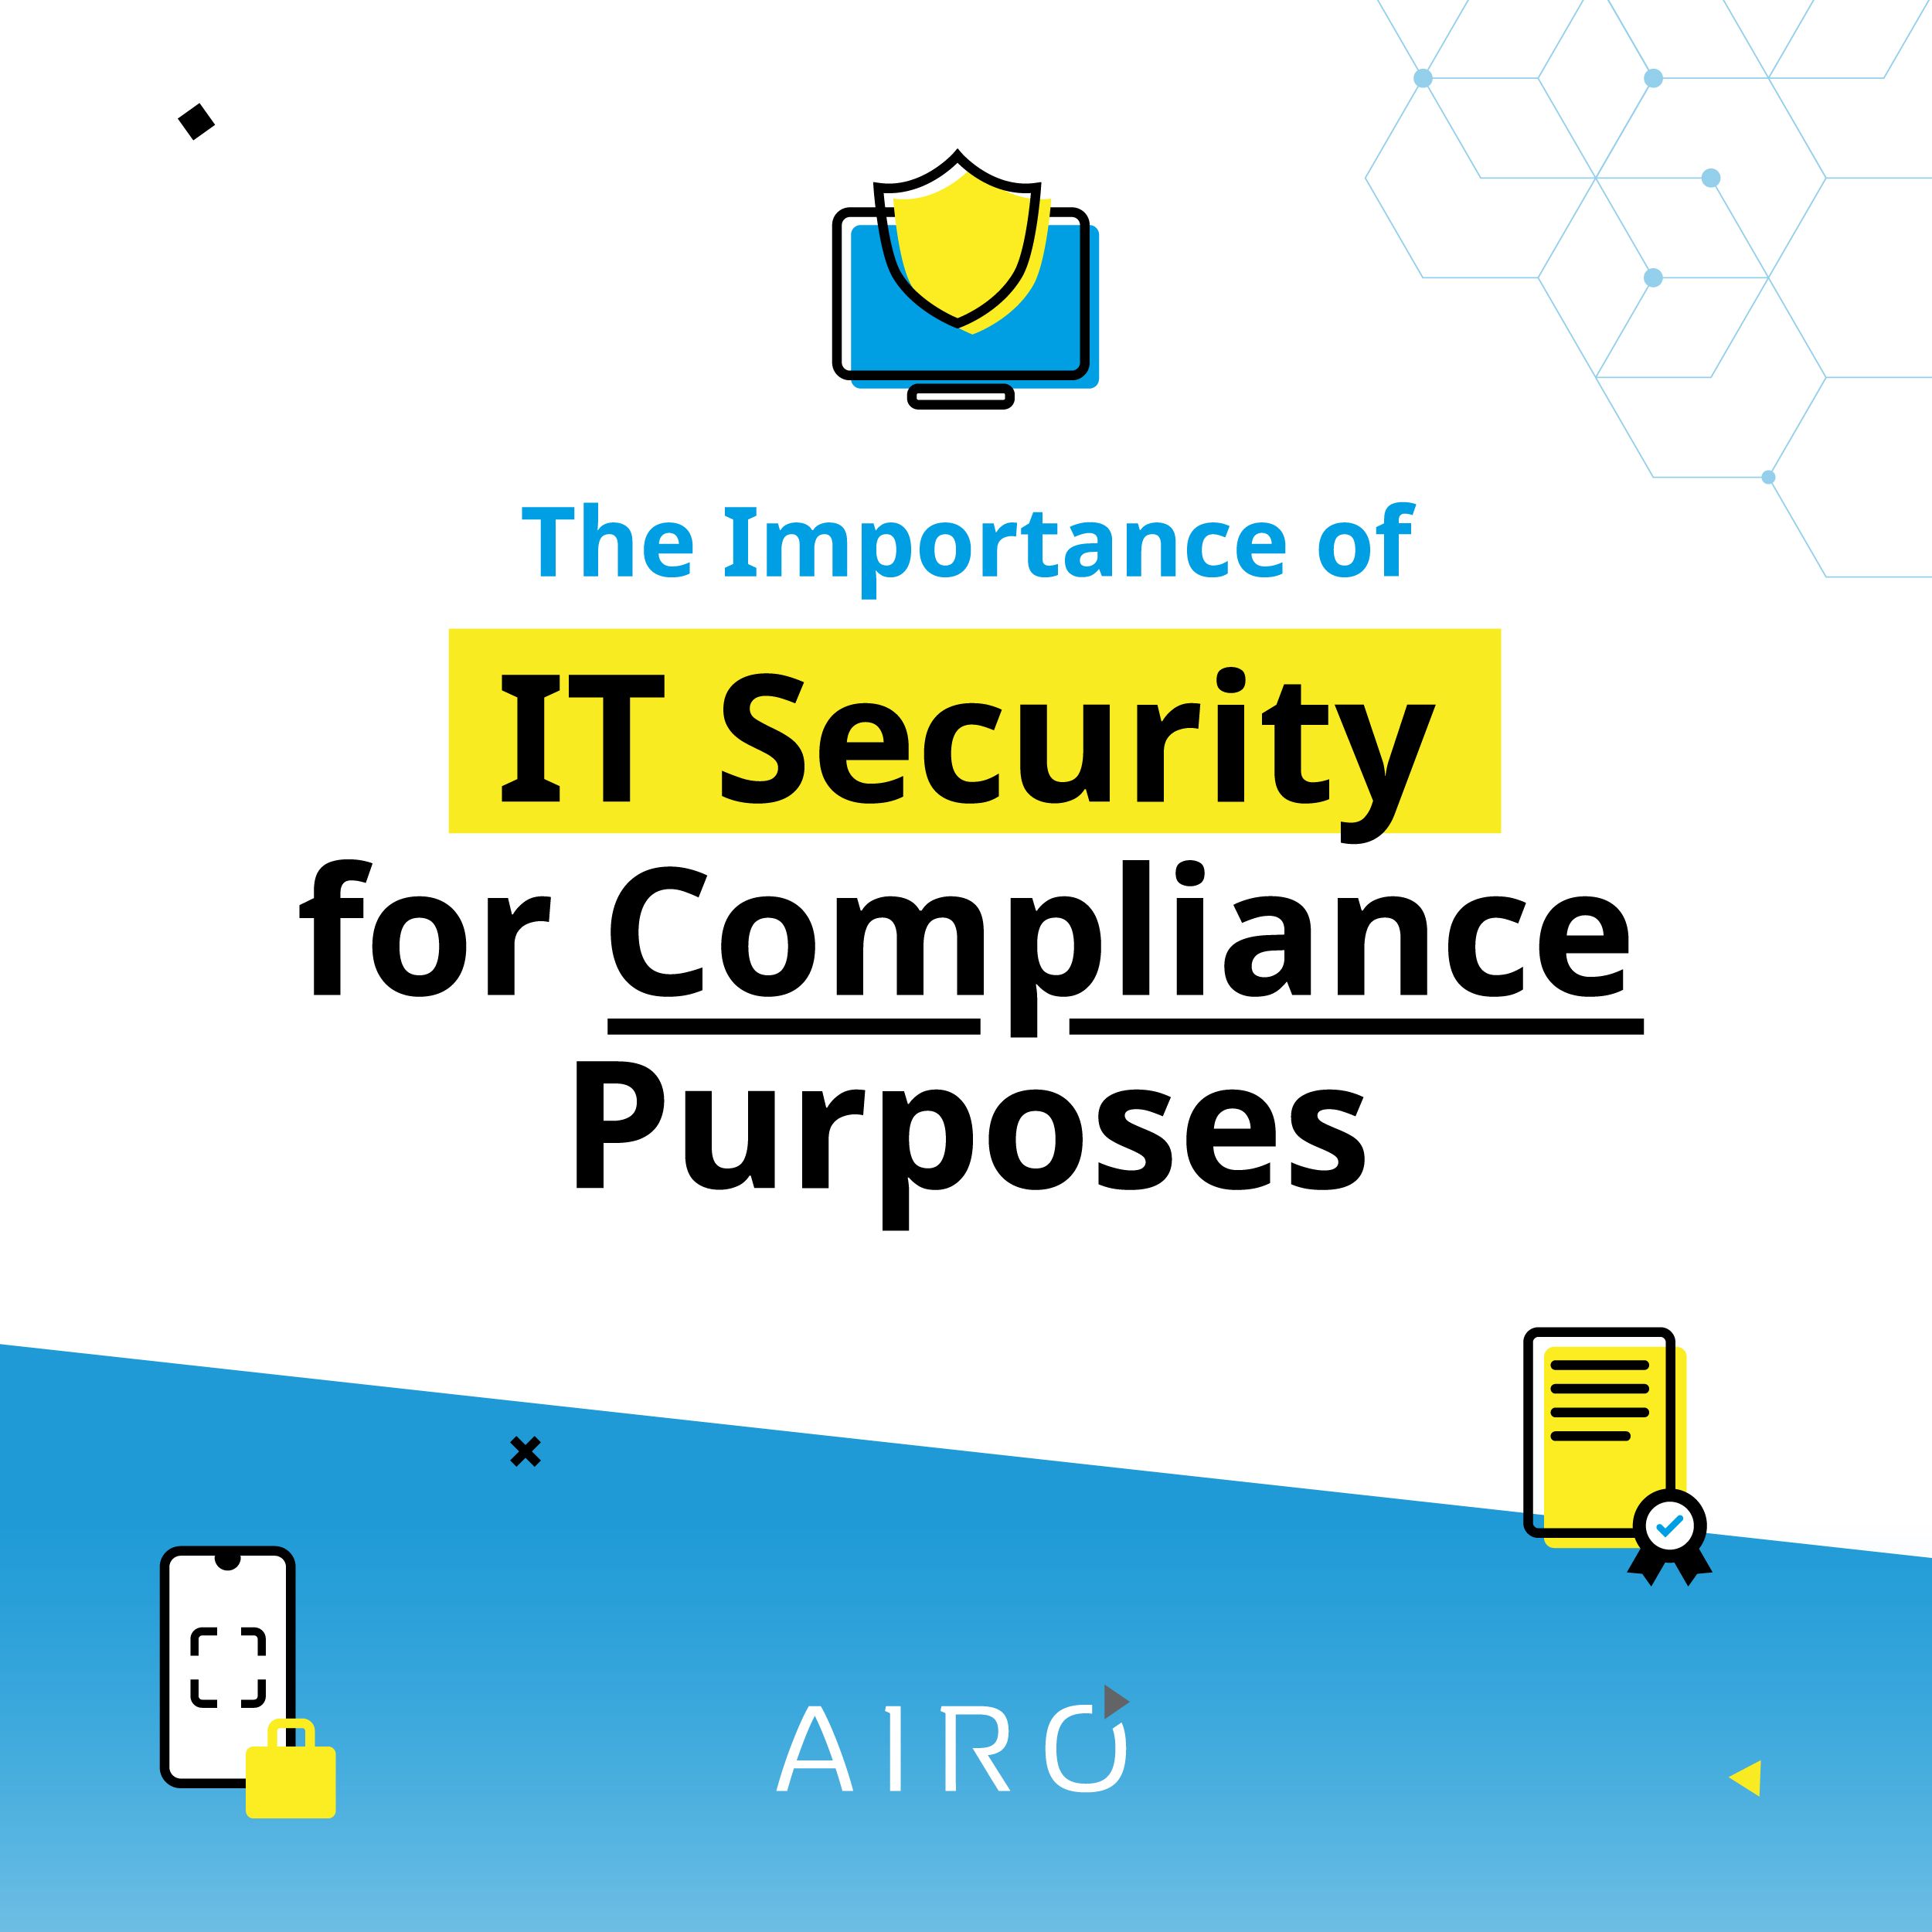 The Importance of IT Security for Compliance Purposes